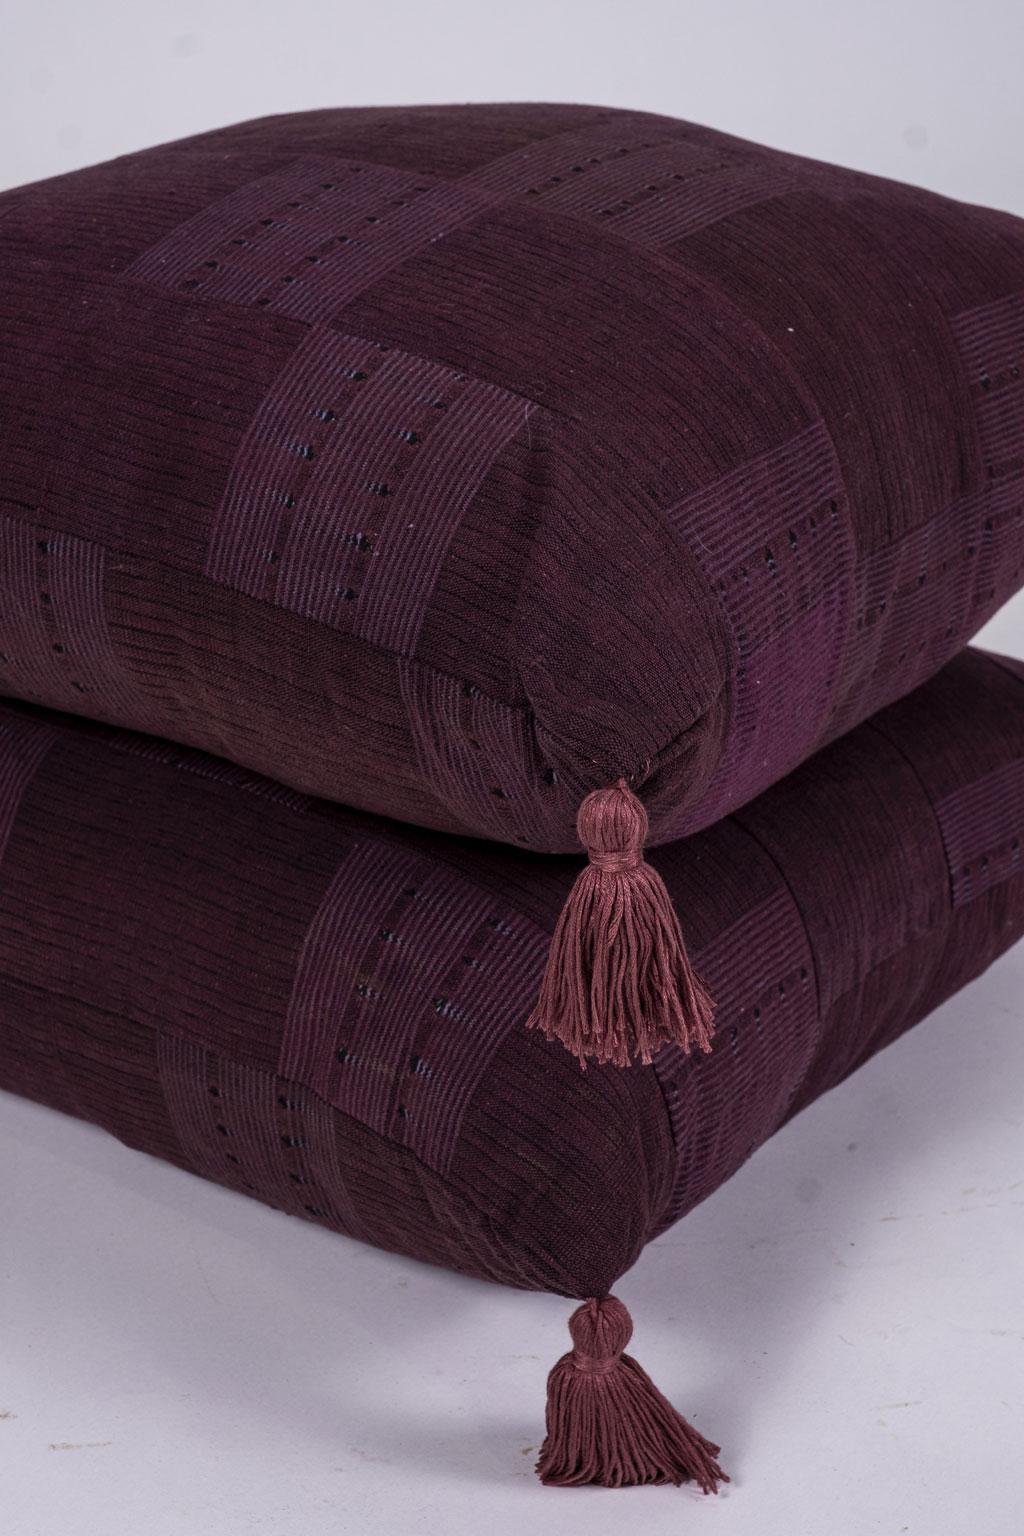 Plum color cushions with tassels, front and reverse made from vintage African fabric woven from wild silk and cotton. Includes zipper and feather insert. Two available. Sold separately and priced $440 each.